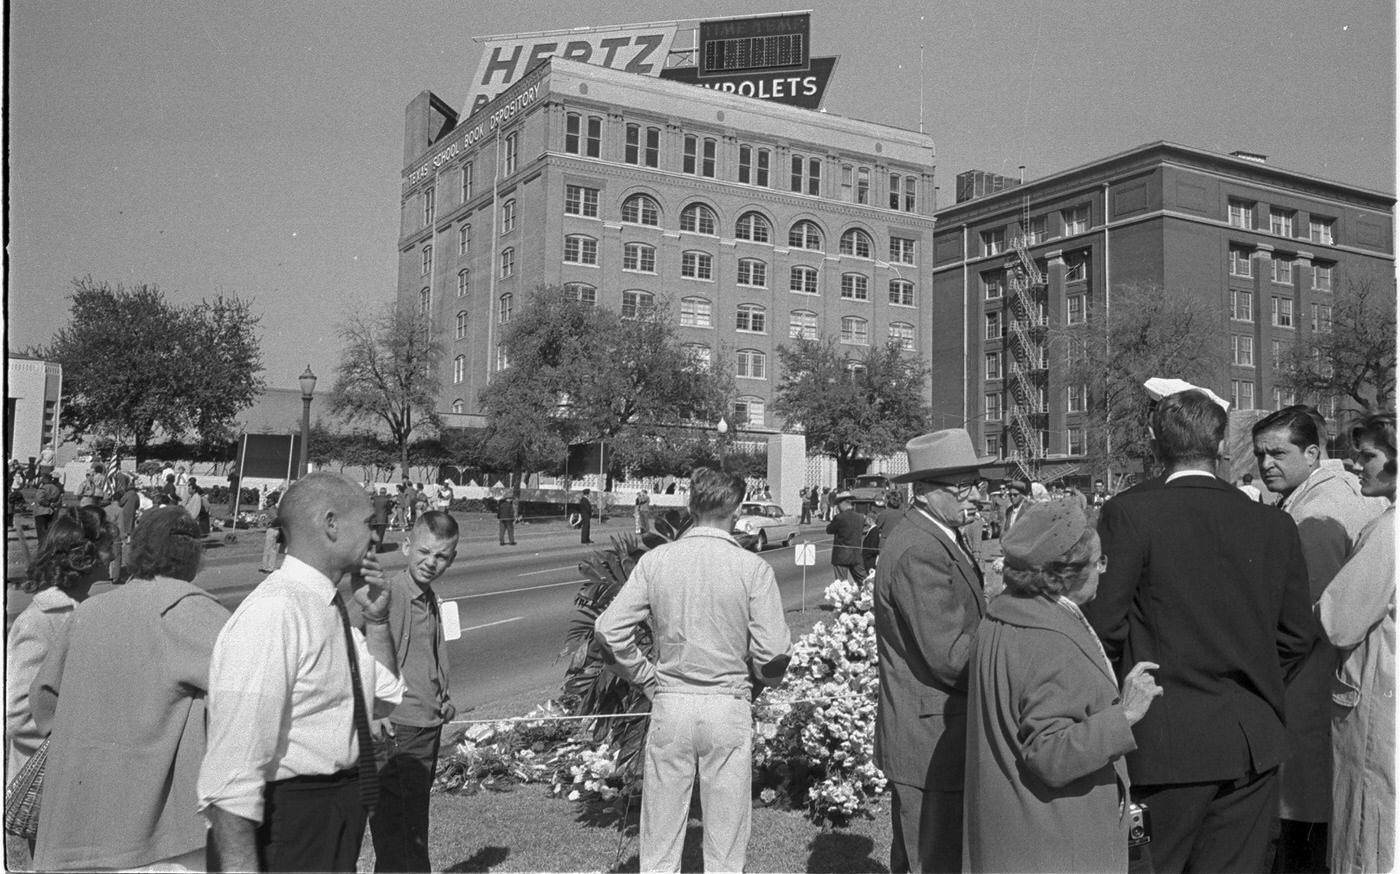 Dealey Plaza, Dallas, Texas, showing area near Texas State Book Depository building following President John F. Kennedy's assassination, 1963